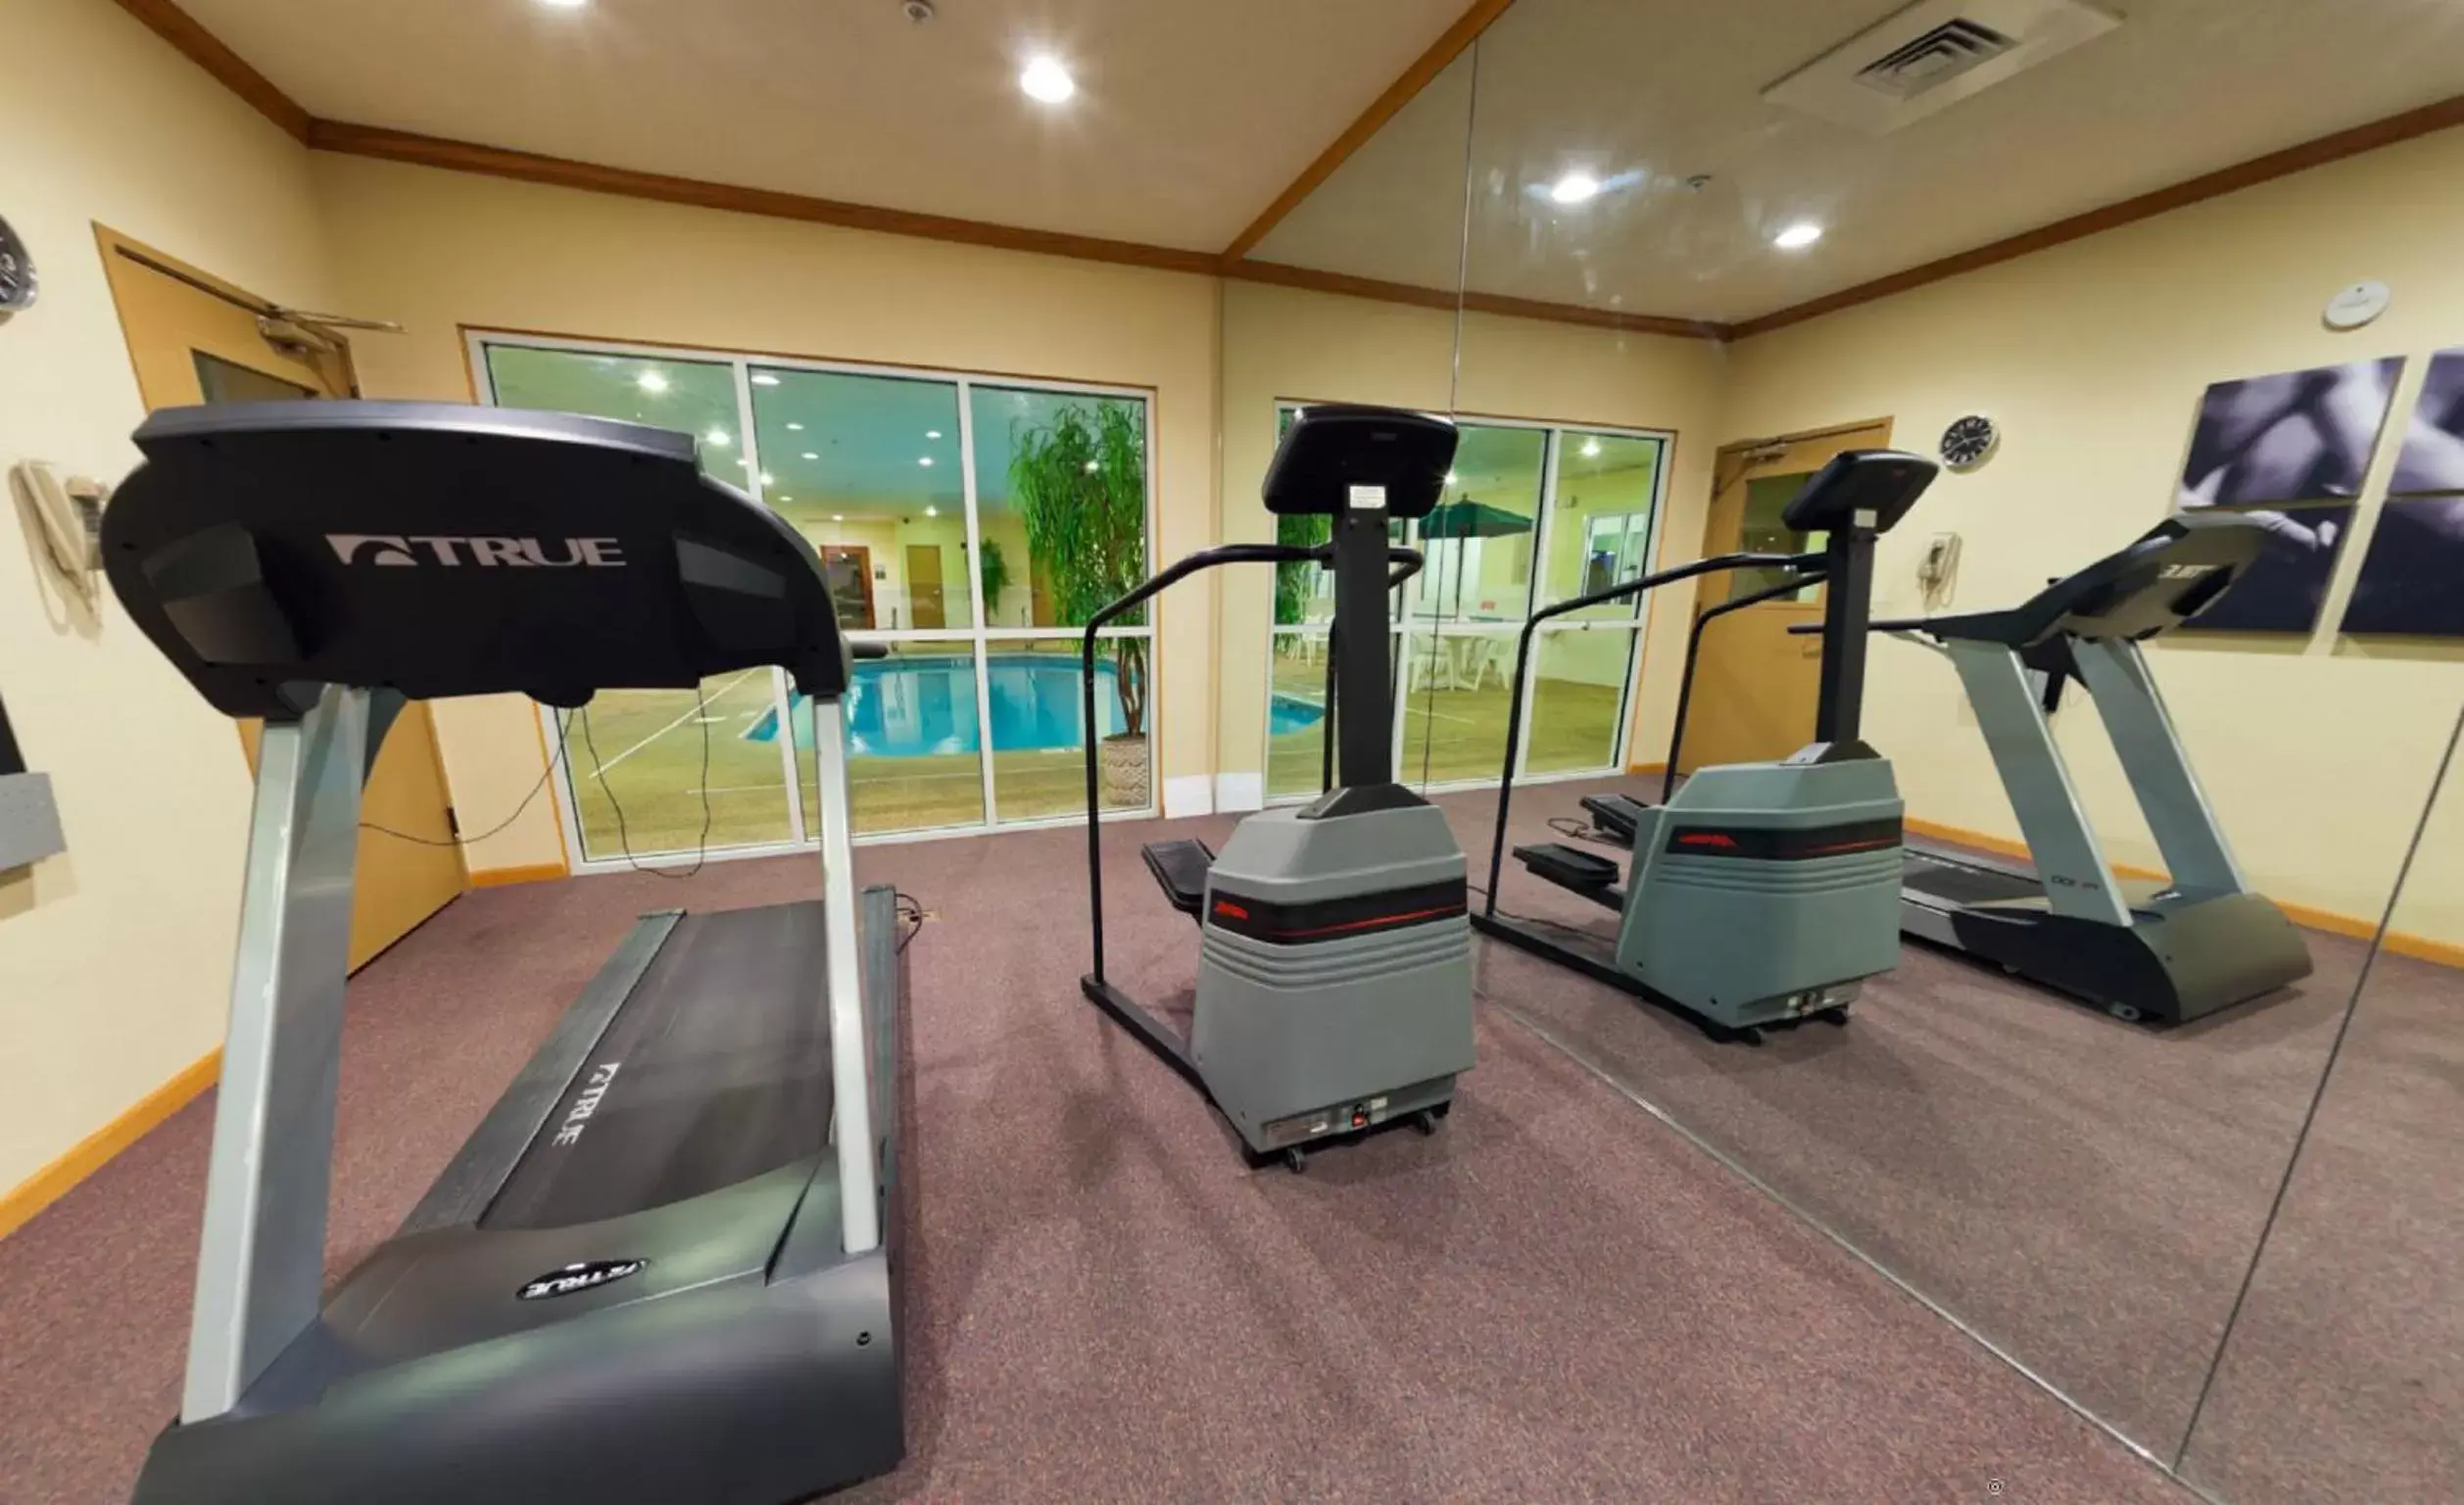 Fitness centre/facilities, Fitness Center/Facilities in Country Inn & Suites by Radisson, Rock Falls, IL